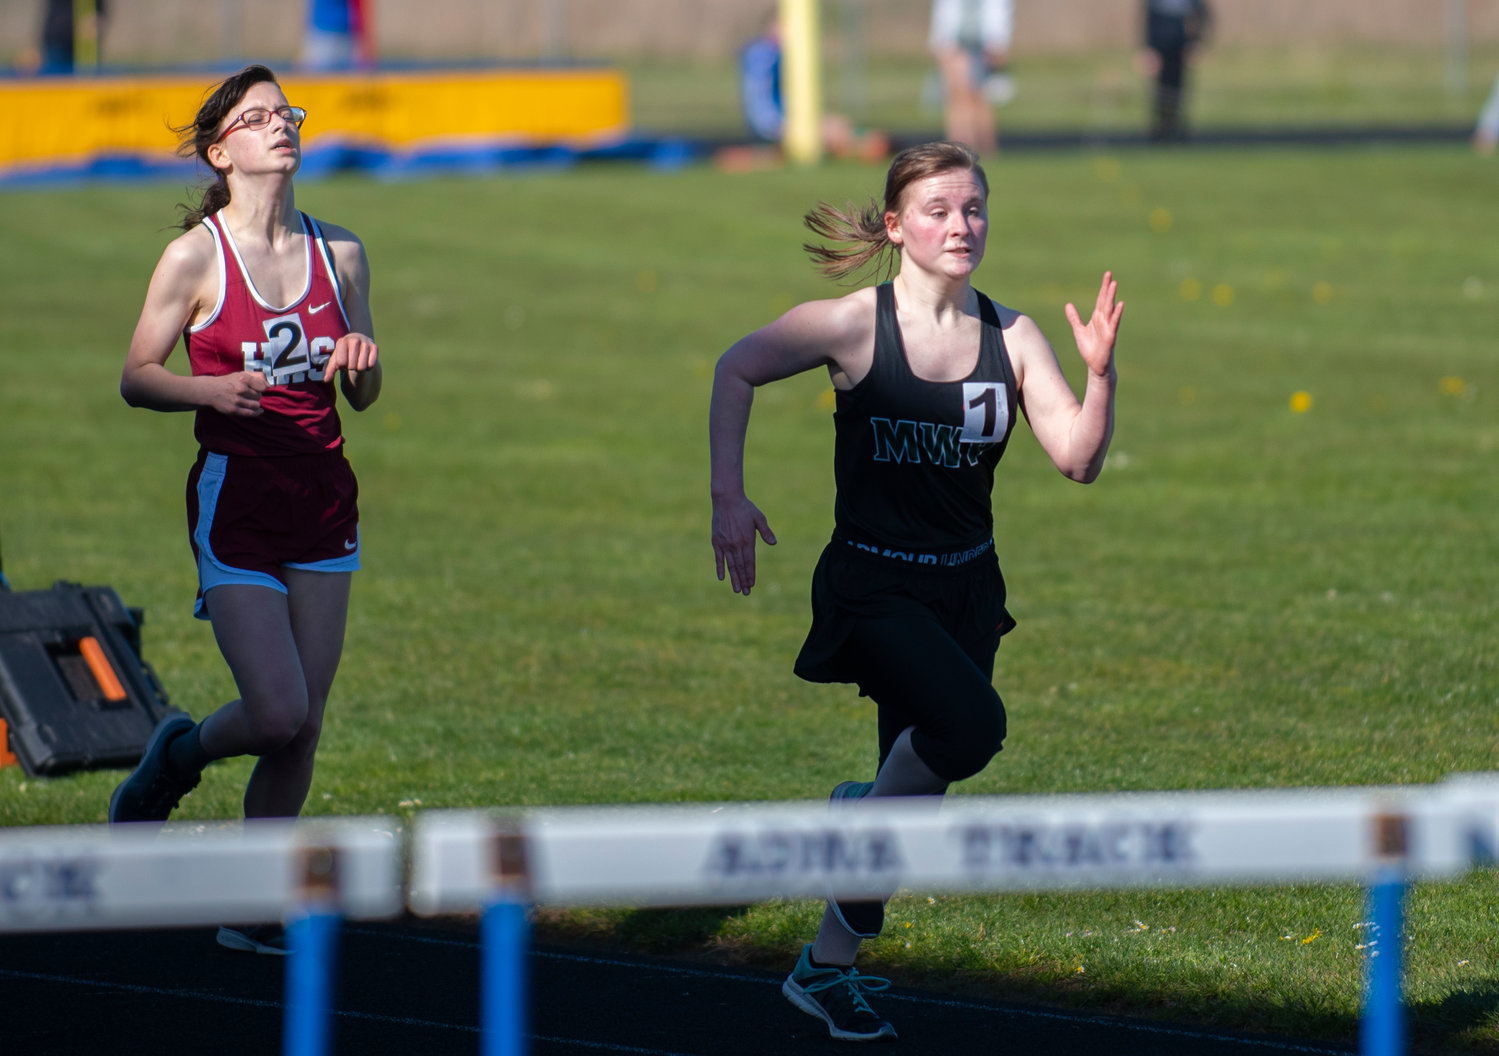 Morton-White Pass sophomore Ayricka Hughes, right, passes a Hoquiam runner in the final 50 meters of the girls 3200-meter run to finish in second place.